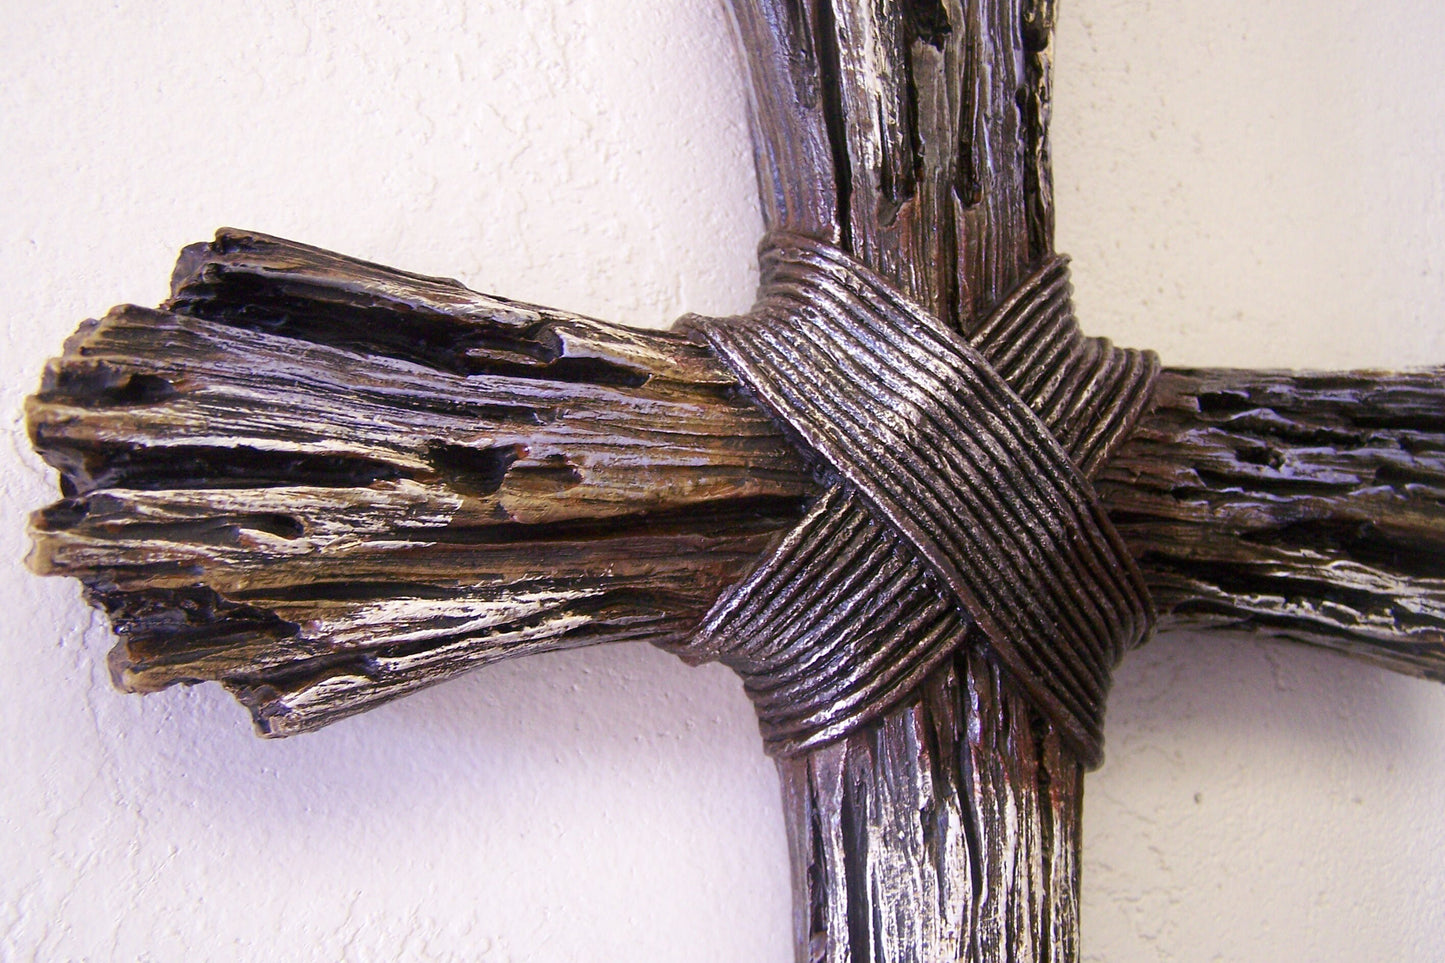 Rustic Resin Cross - Faux Wood and Wires